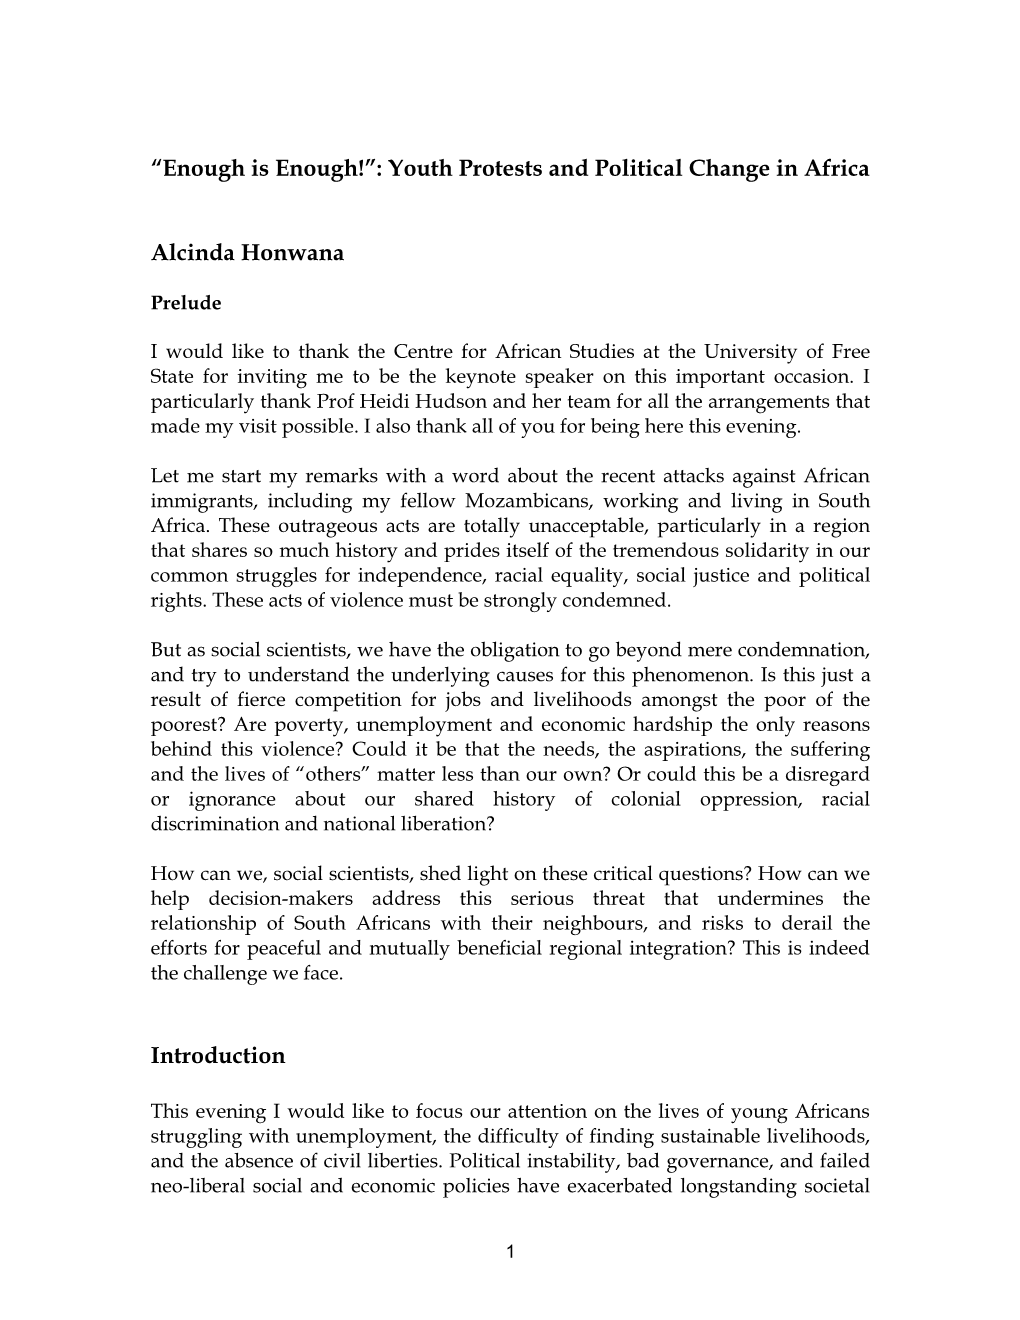 Youth, Waithood and Protest Movements in Africa